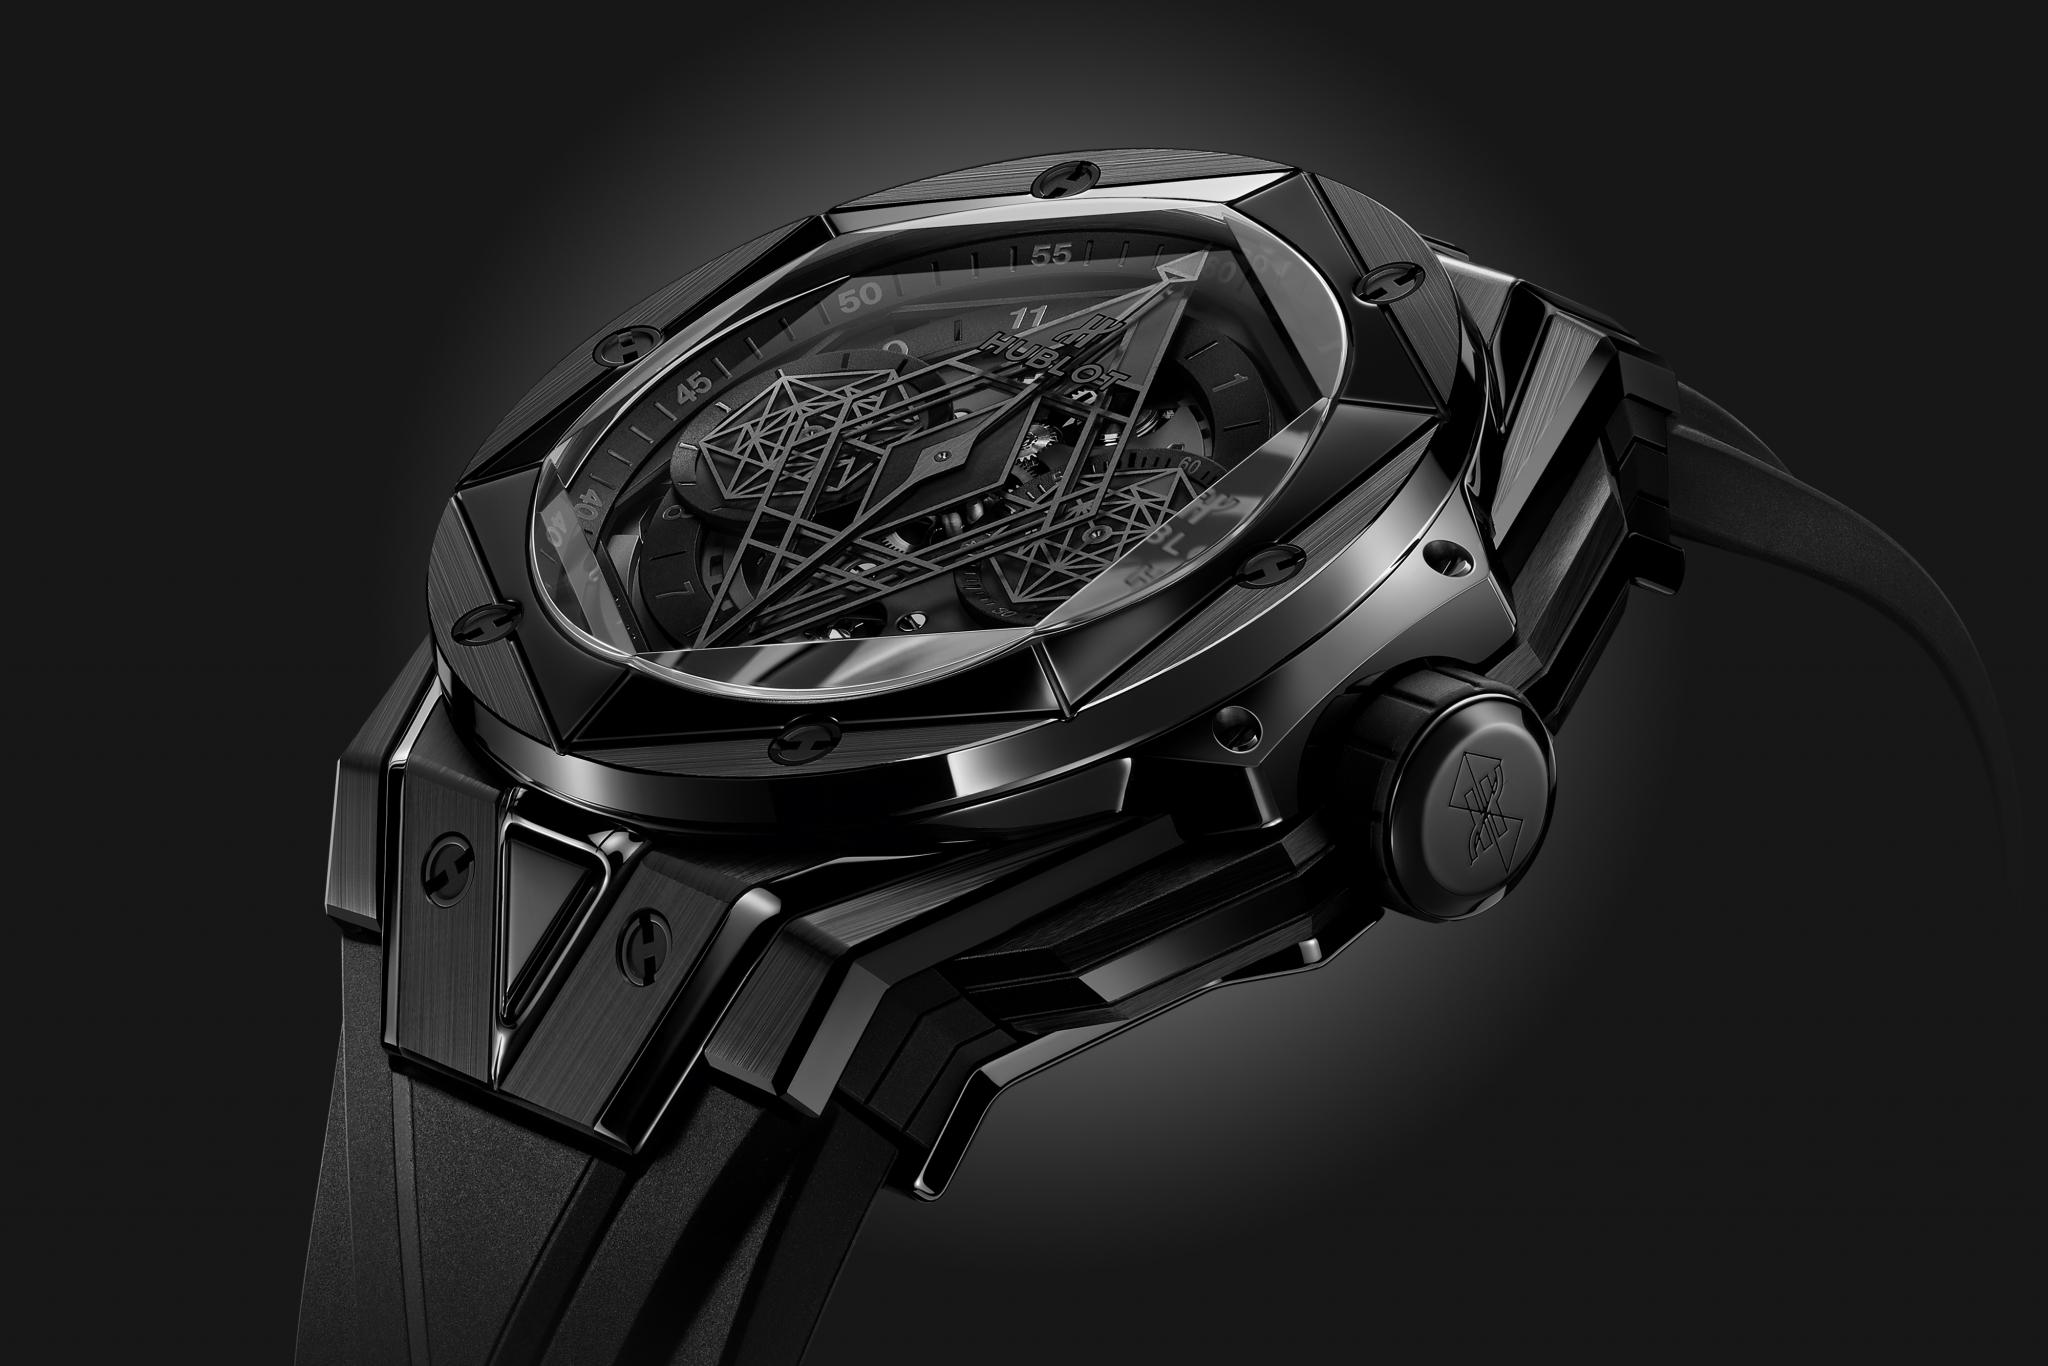 Wrist Watch: Hublot, Panerai, and more in the world of watches